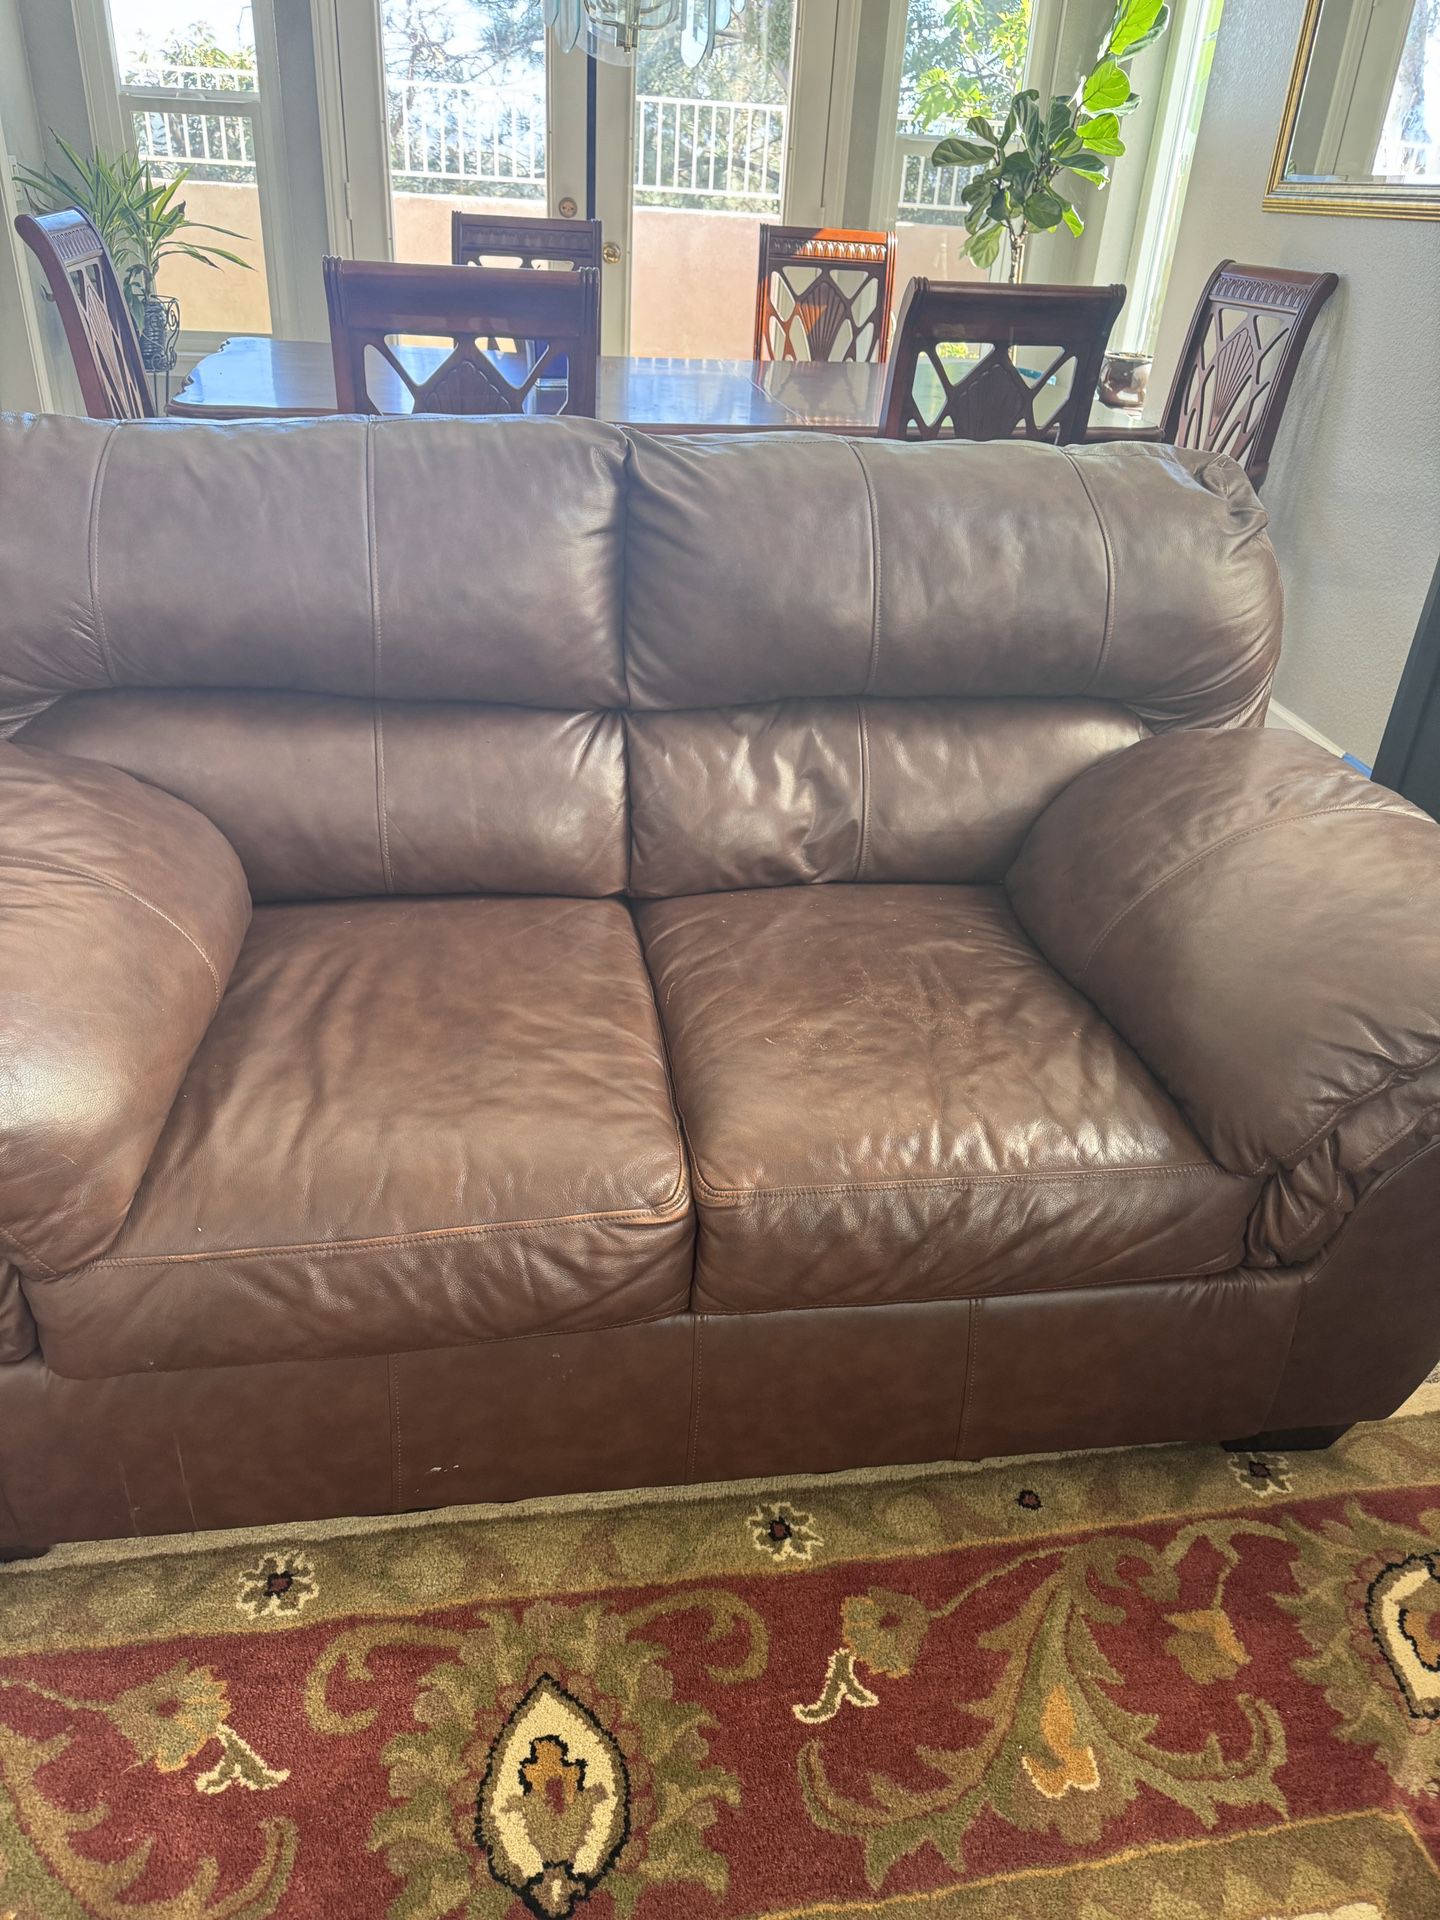 Leather Sofa Set Available For Pick Up 